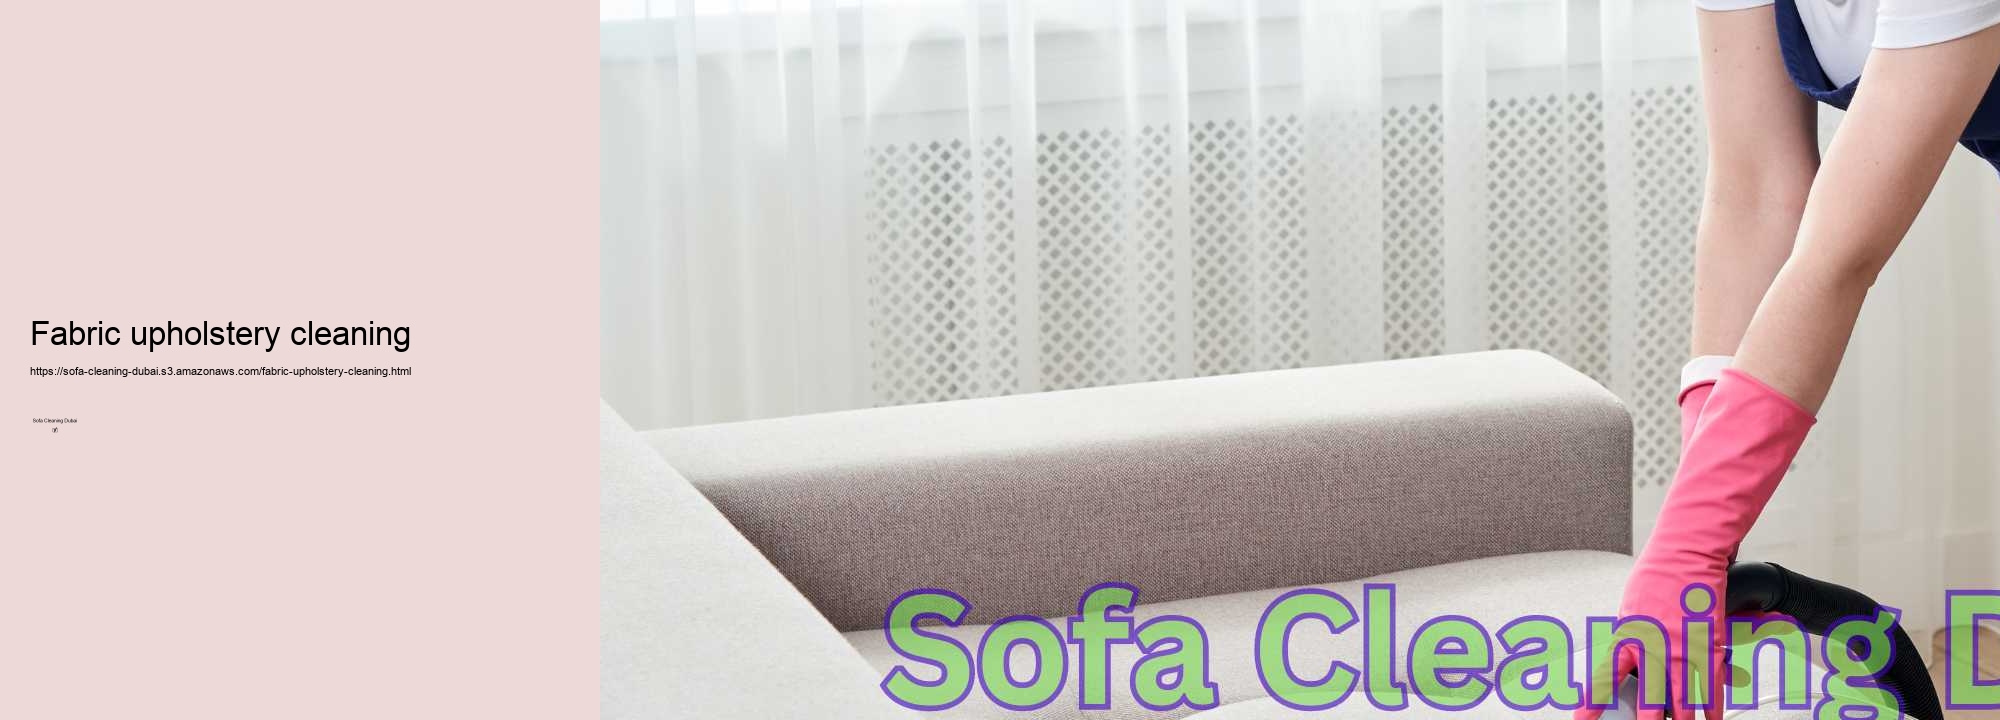 Fabric upholstery cleaning